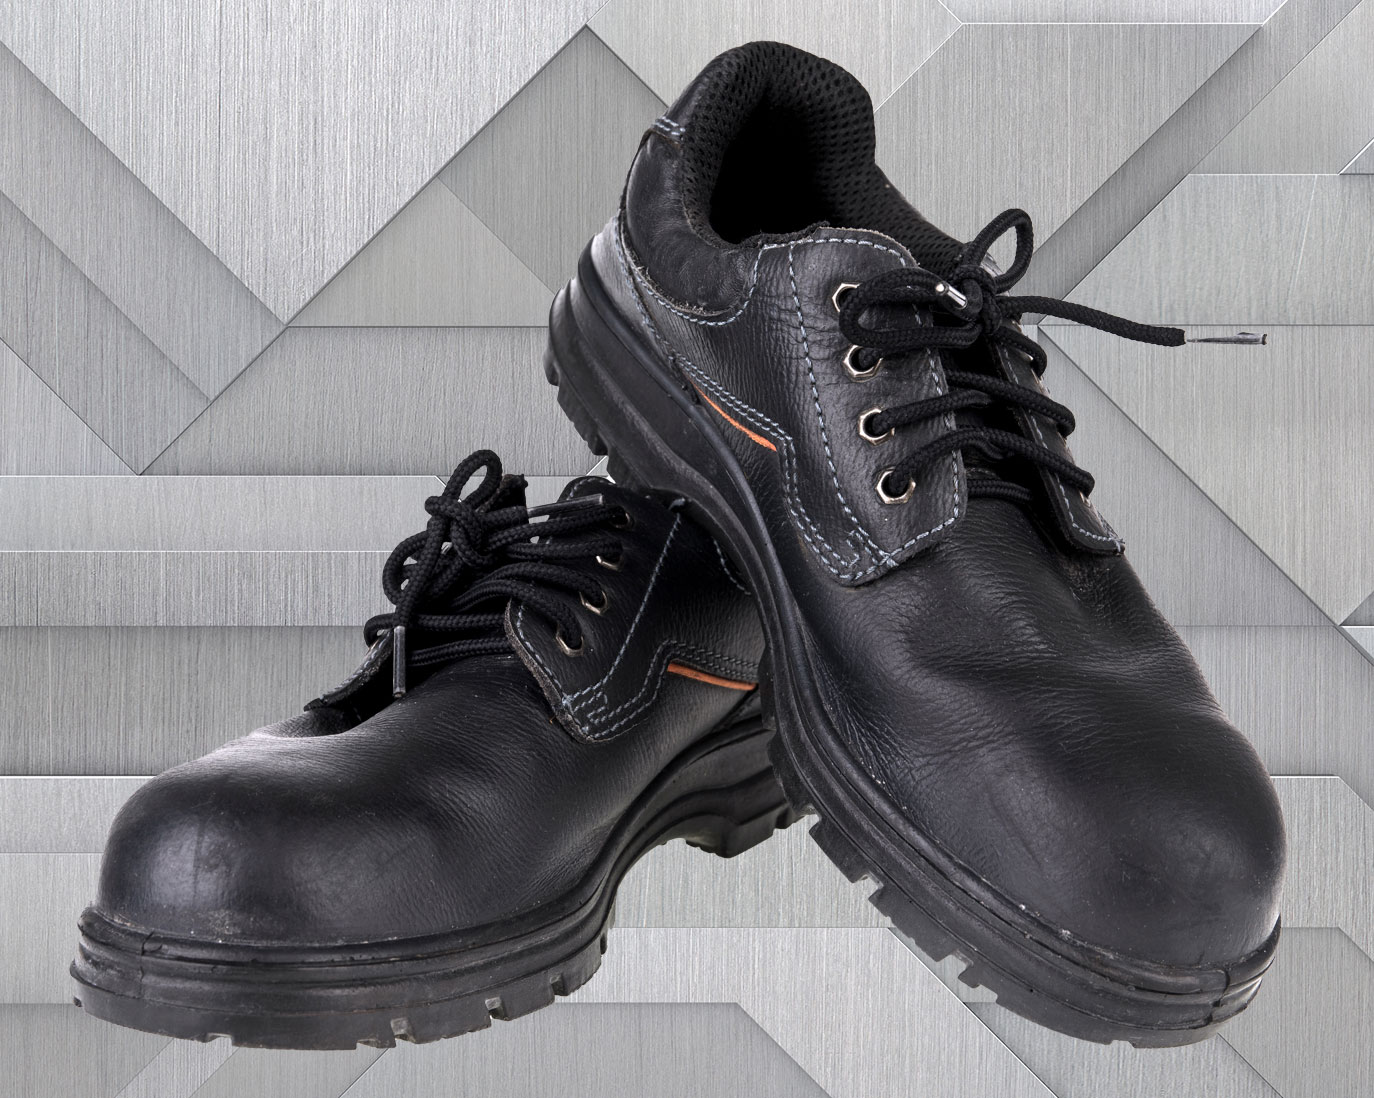 Know about best lightweight safety shoes